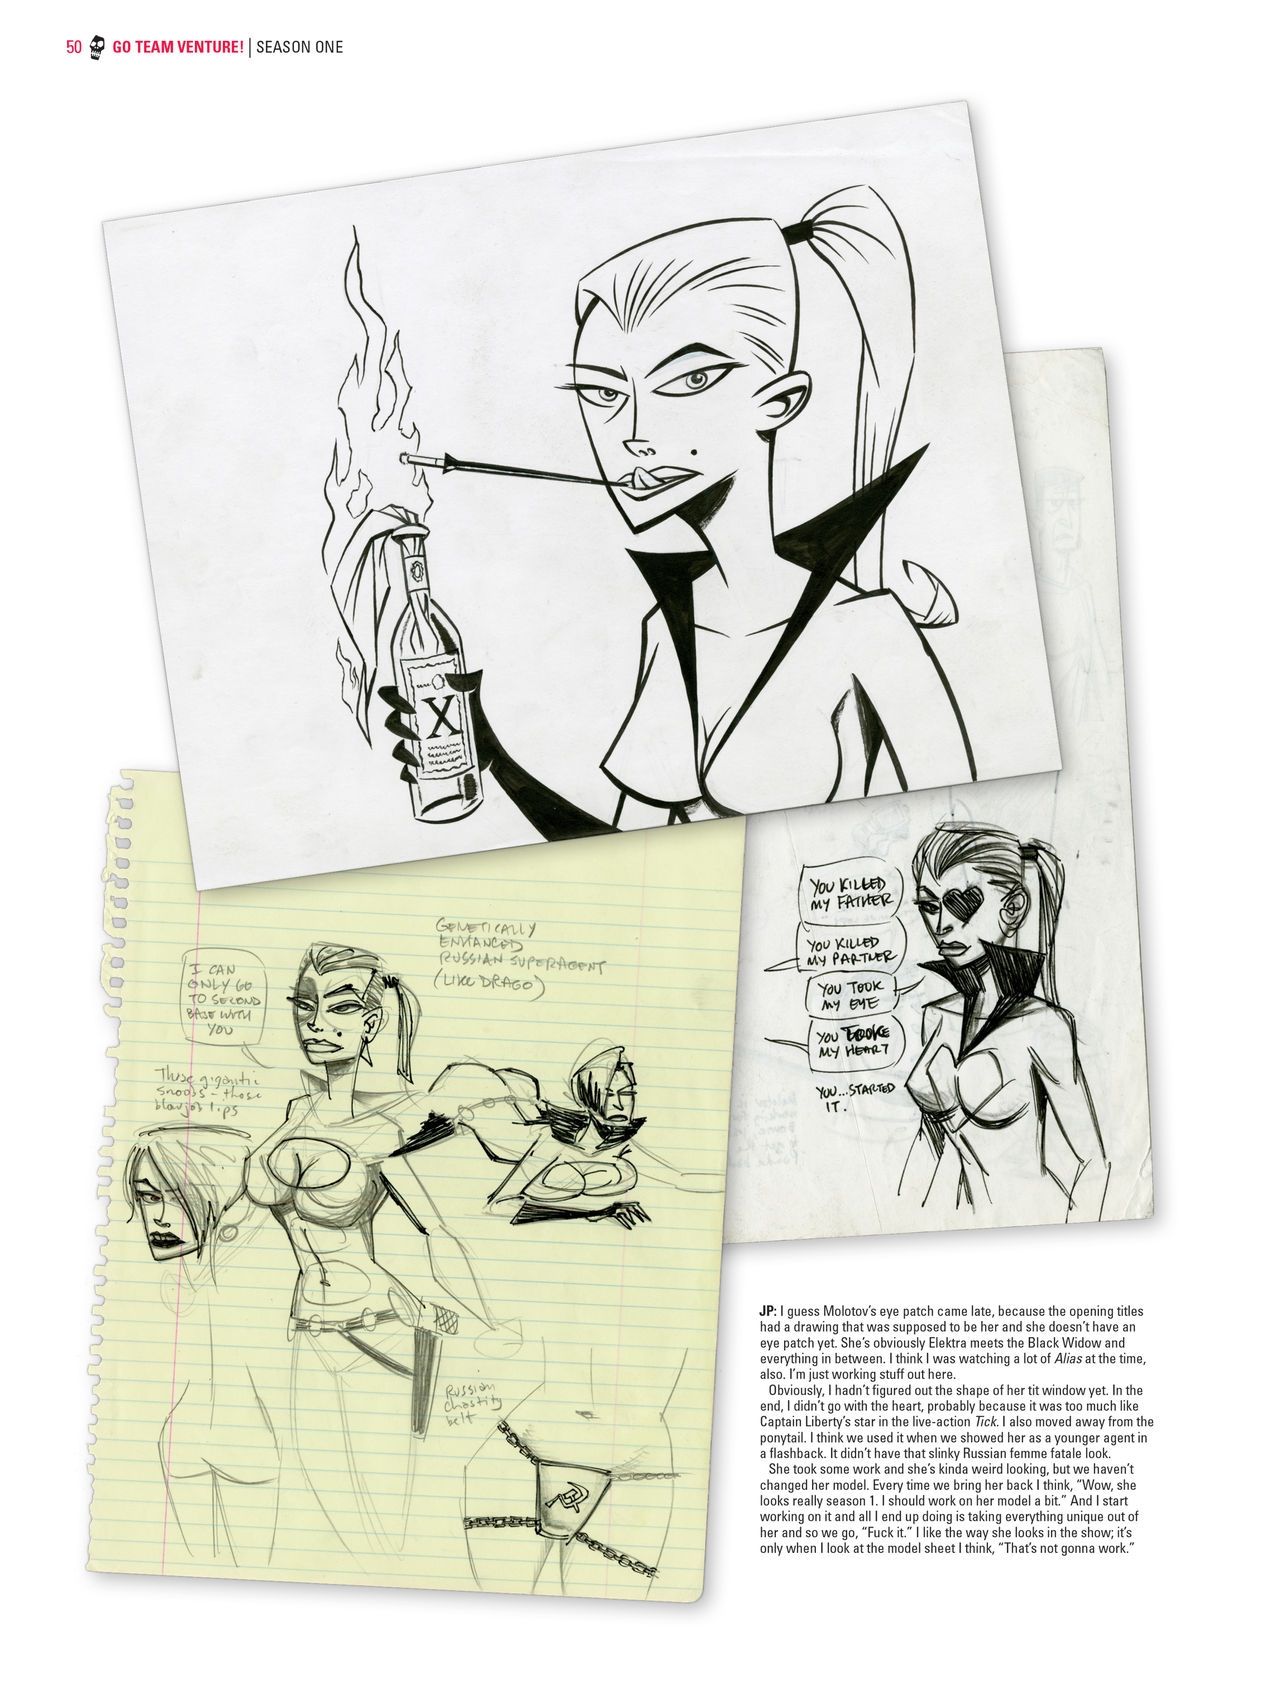 Go Team Venture! - The Art and Making of the Venture Bros 49